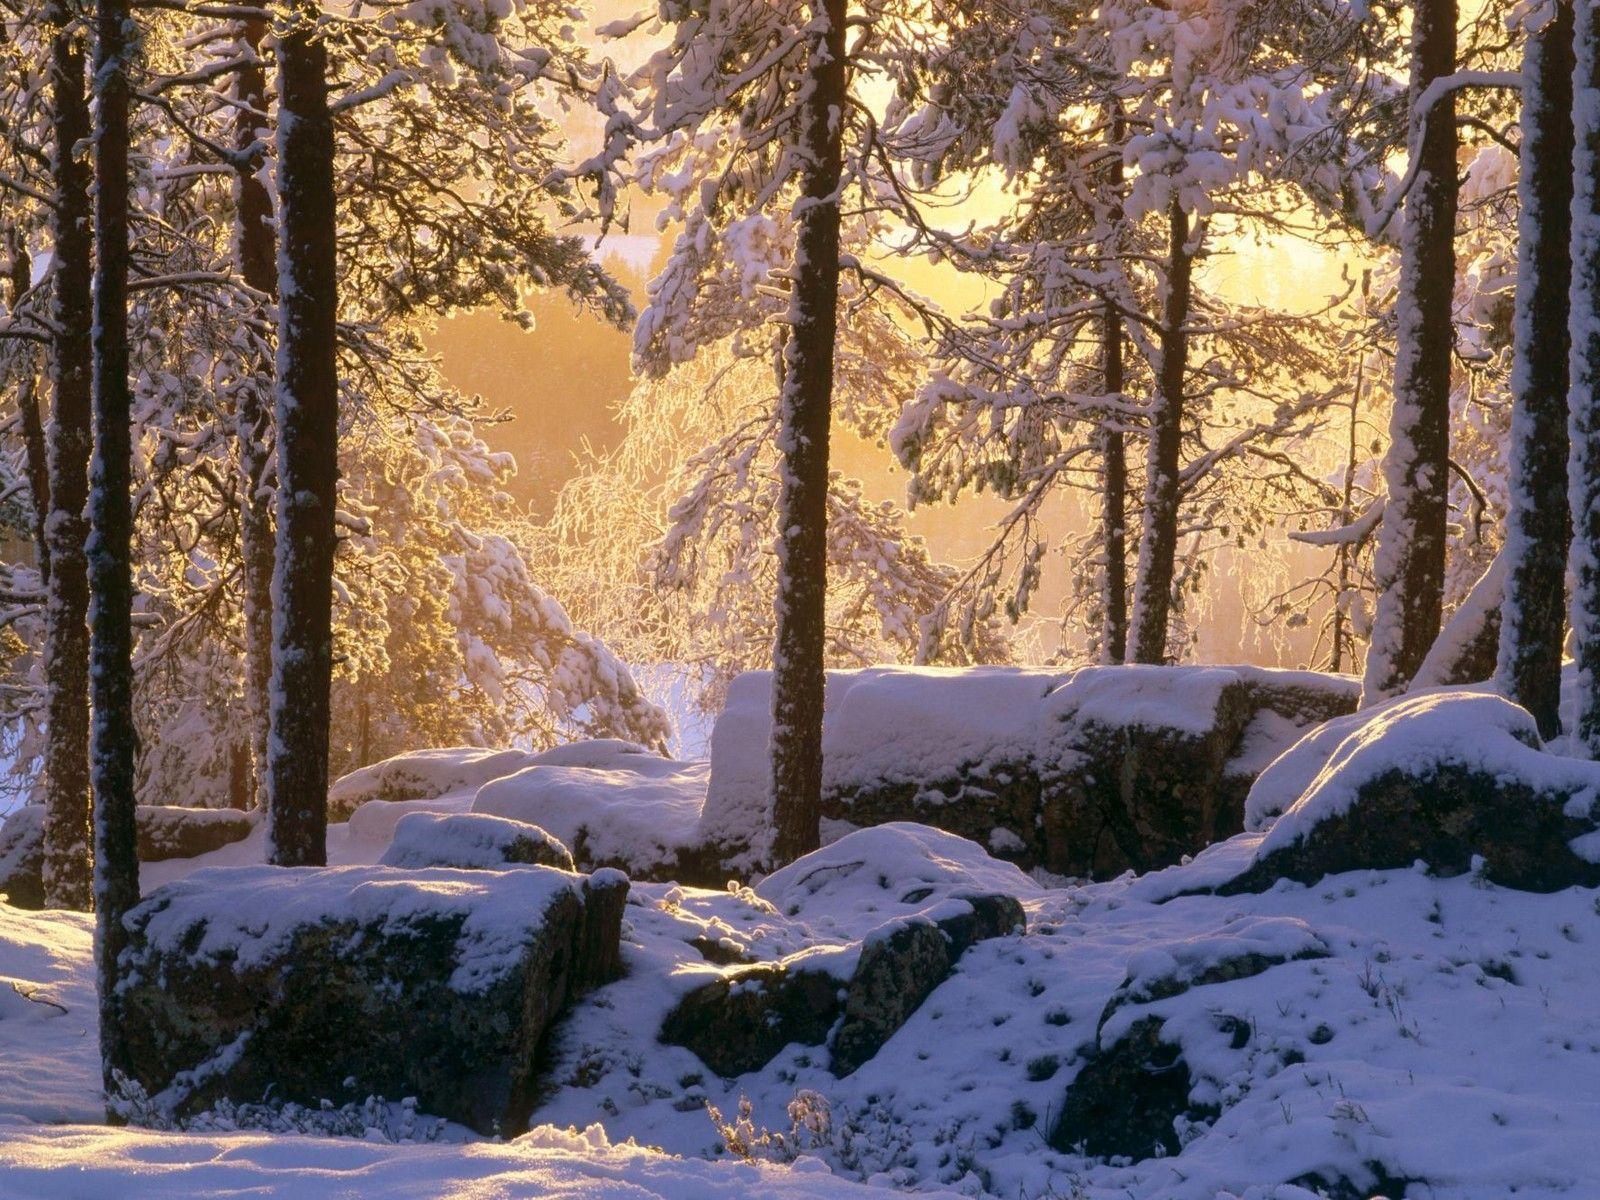 Snowy pine forest wallpaper. Snowy pine forest